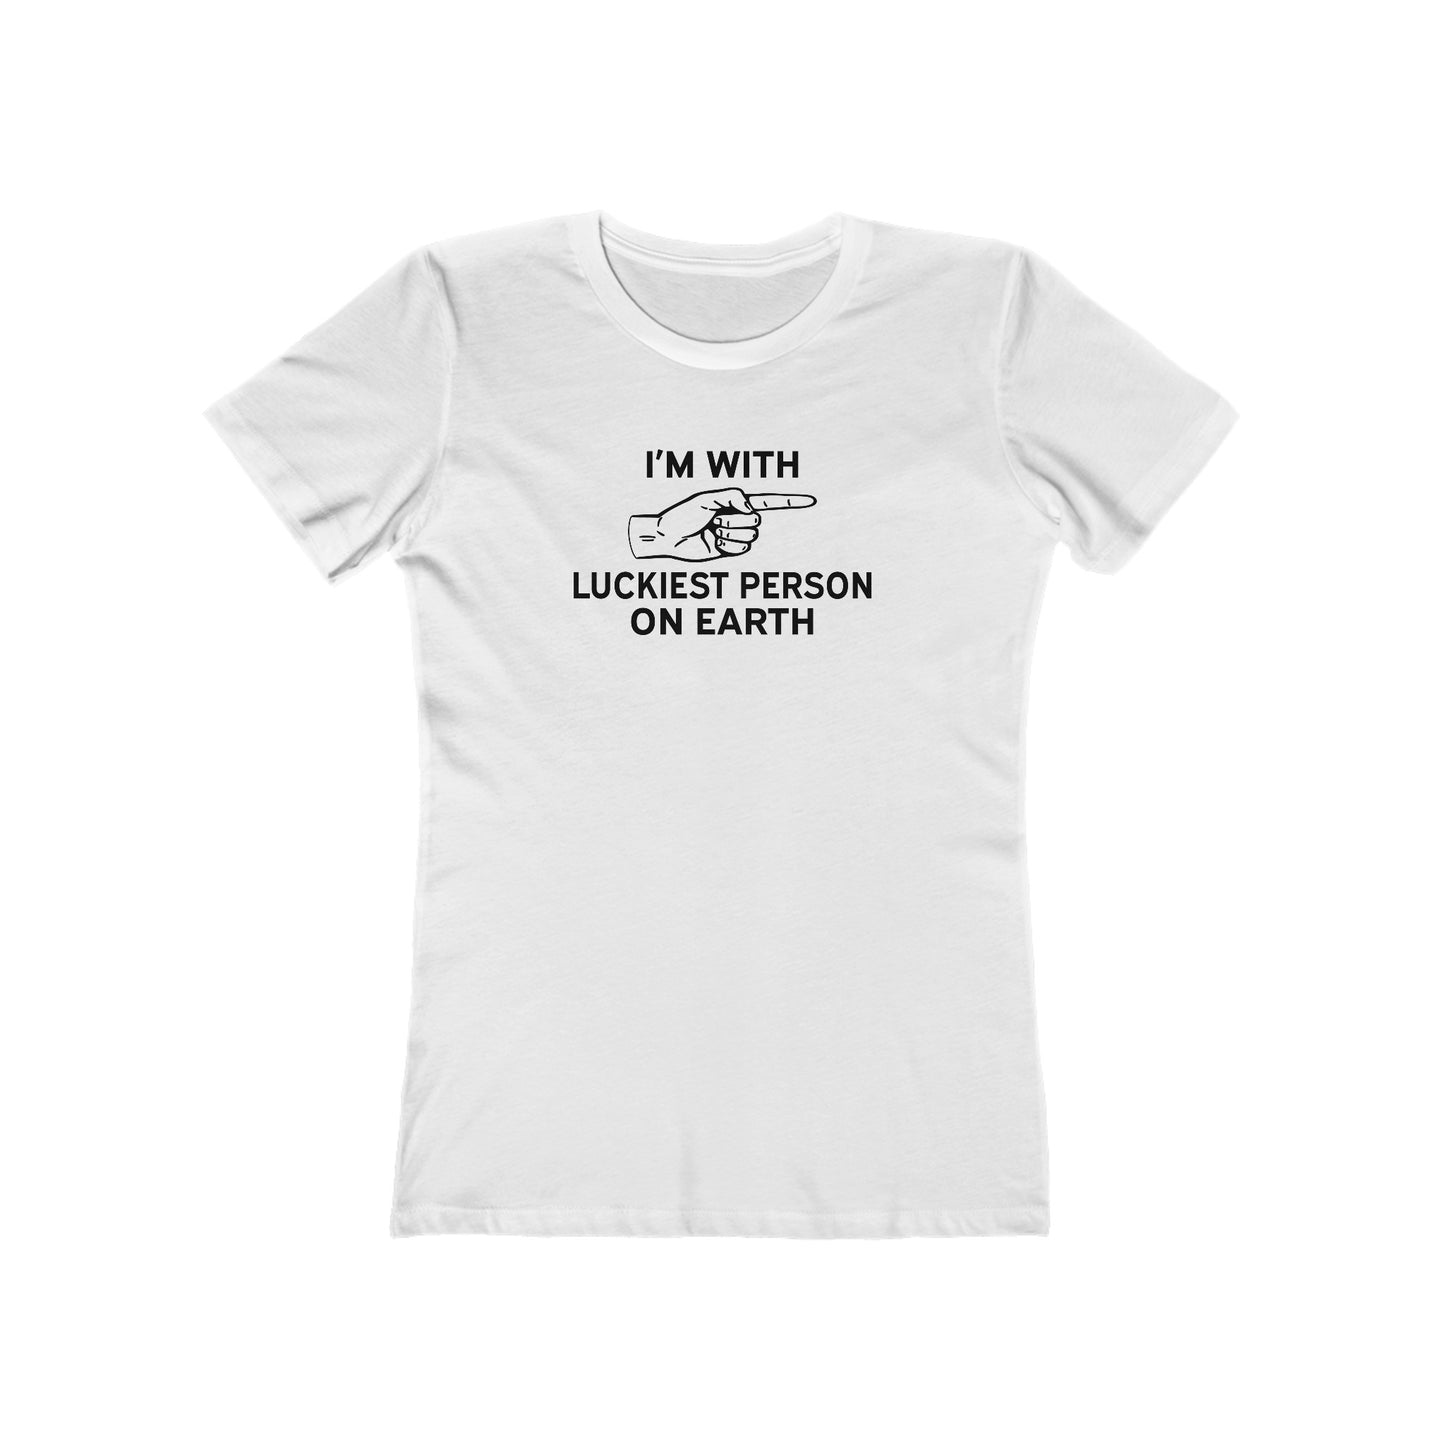 I'm With Luckiest Person on Earth - Women's T-Shirt